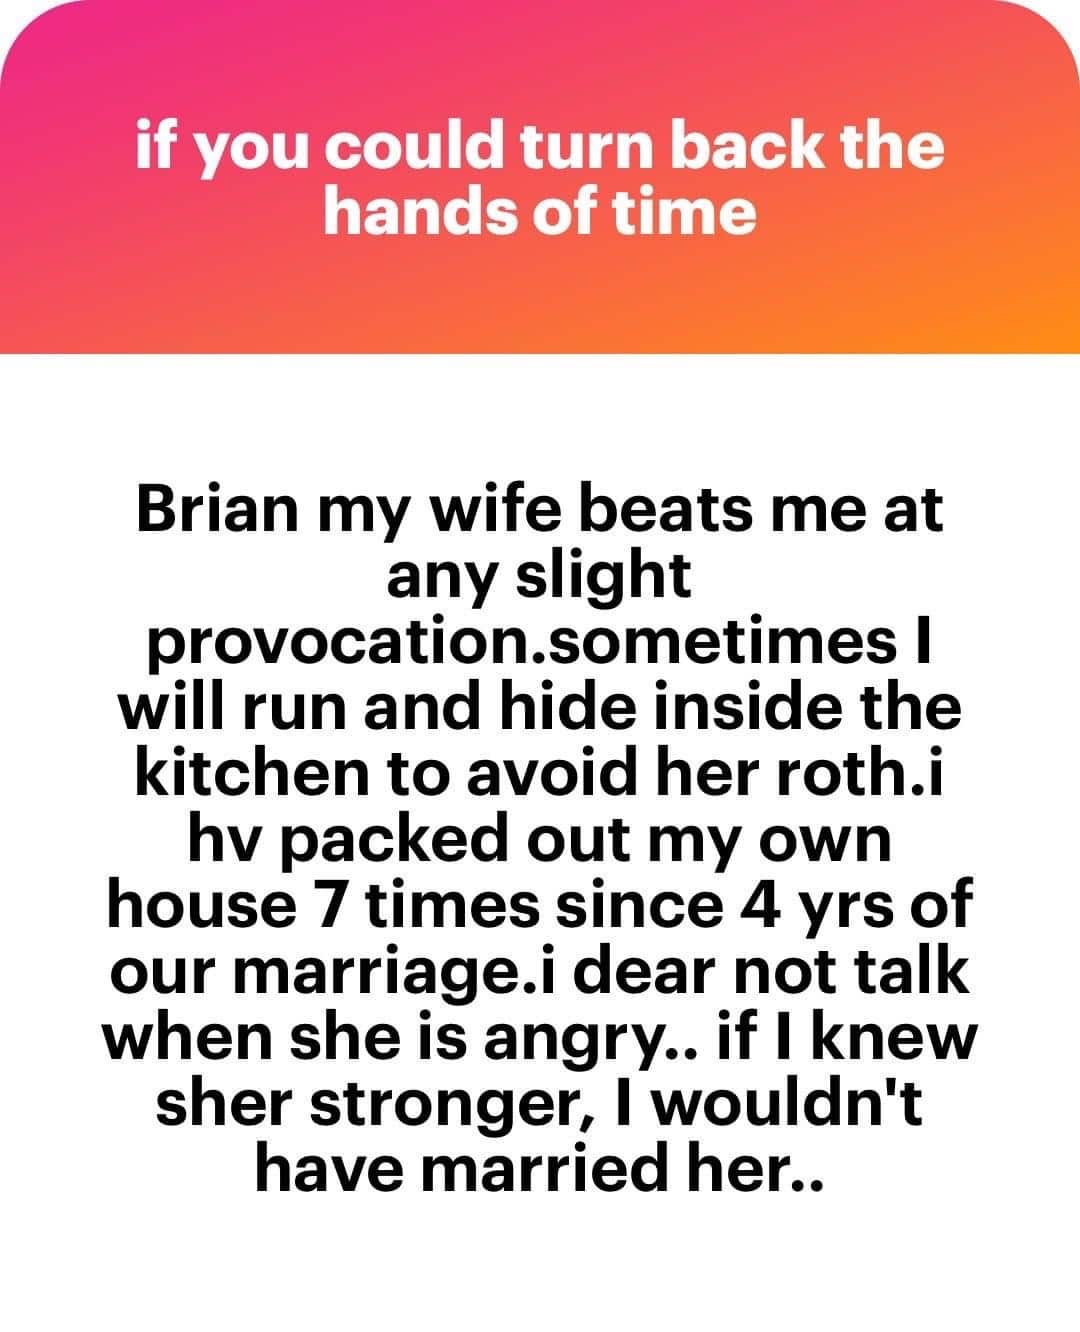 “My wife beats me at any slight provocation” - Strong man cries for help